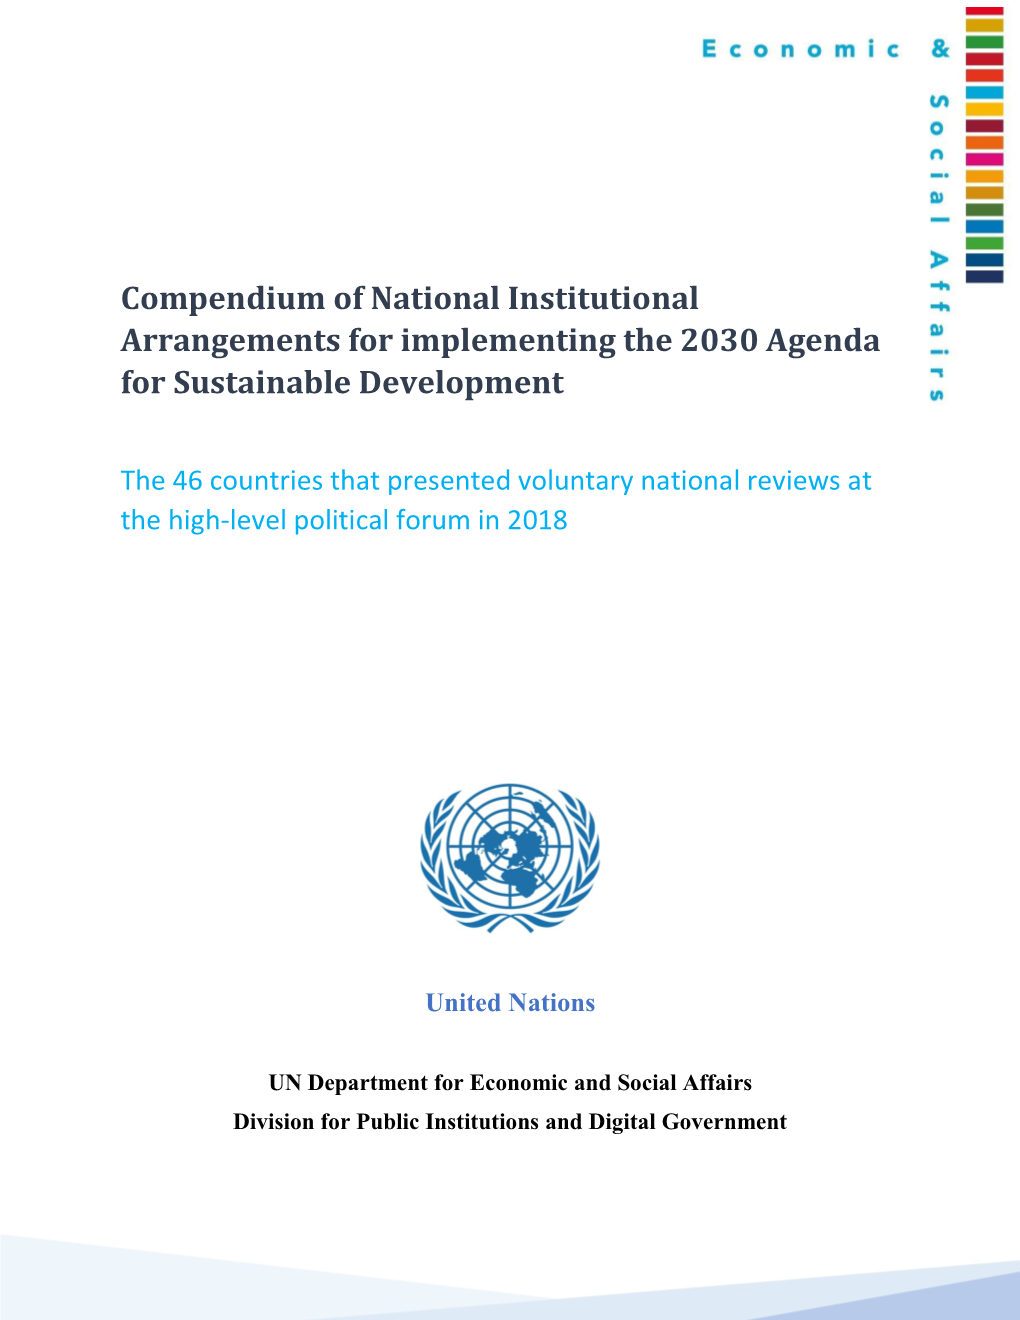 Compendium of National Institutional Arrangements for Implementing the 2030 Agenda for Sustainable Development